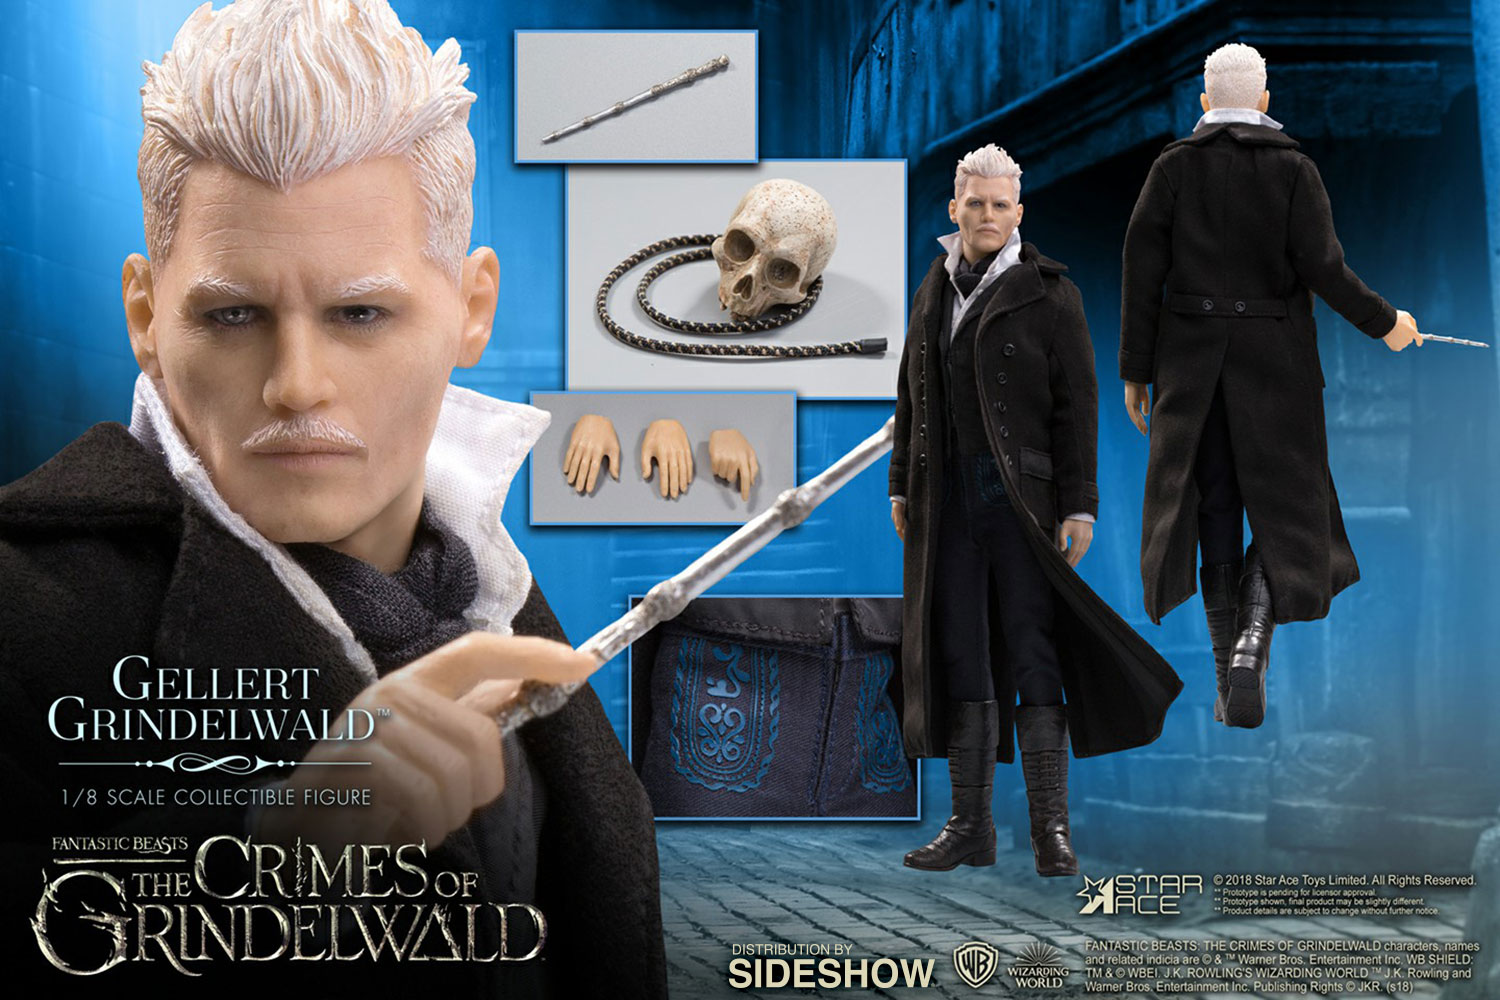 https://www.sideshowtoy.com/assets/products/904187-gellert-grindelwald/lg/fantastic-beasts-the-crimes-of-grindelwald-gellert-grindelwald-collectible-figure-star-ace-904187-01.jpg